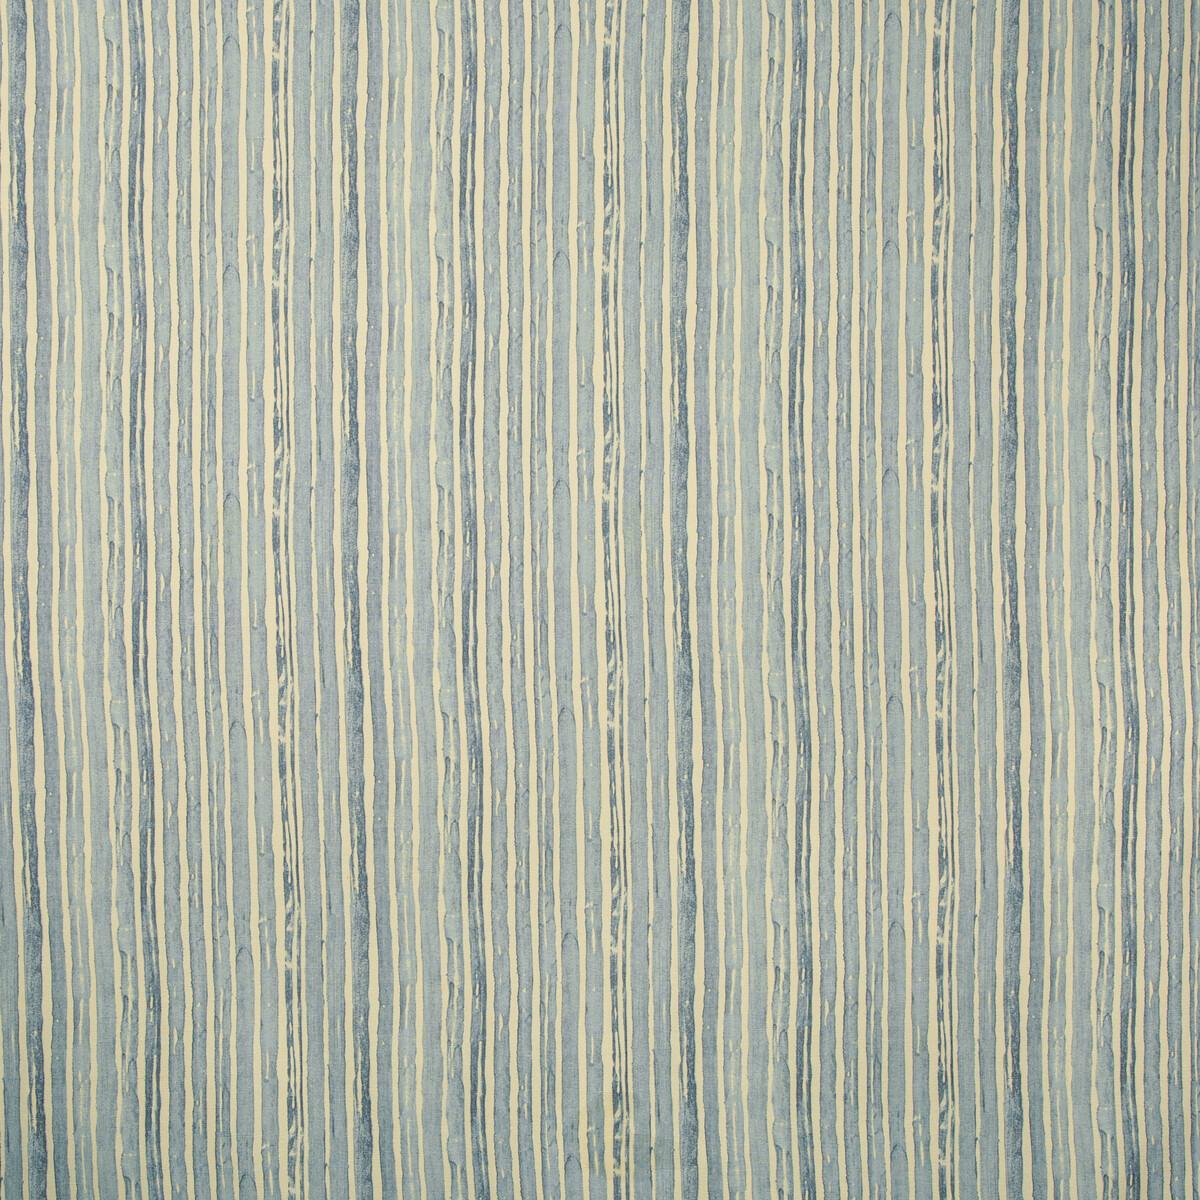 Jean Fabric Background.Blue Jean Texture. Image, Fiber.Faded Denim Fabric  Texture.Denim Texture. Stock Image - Image of detail, cotton: 174785911